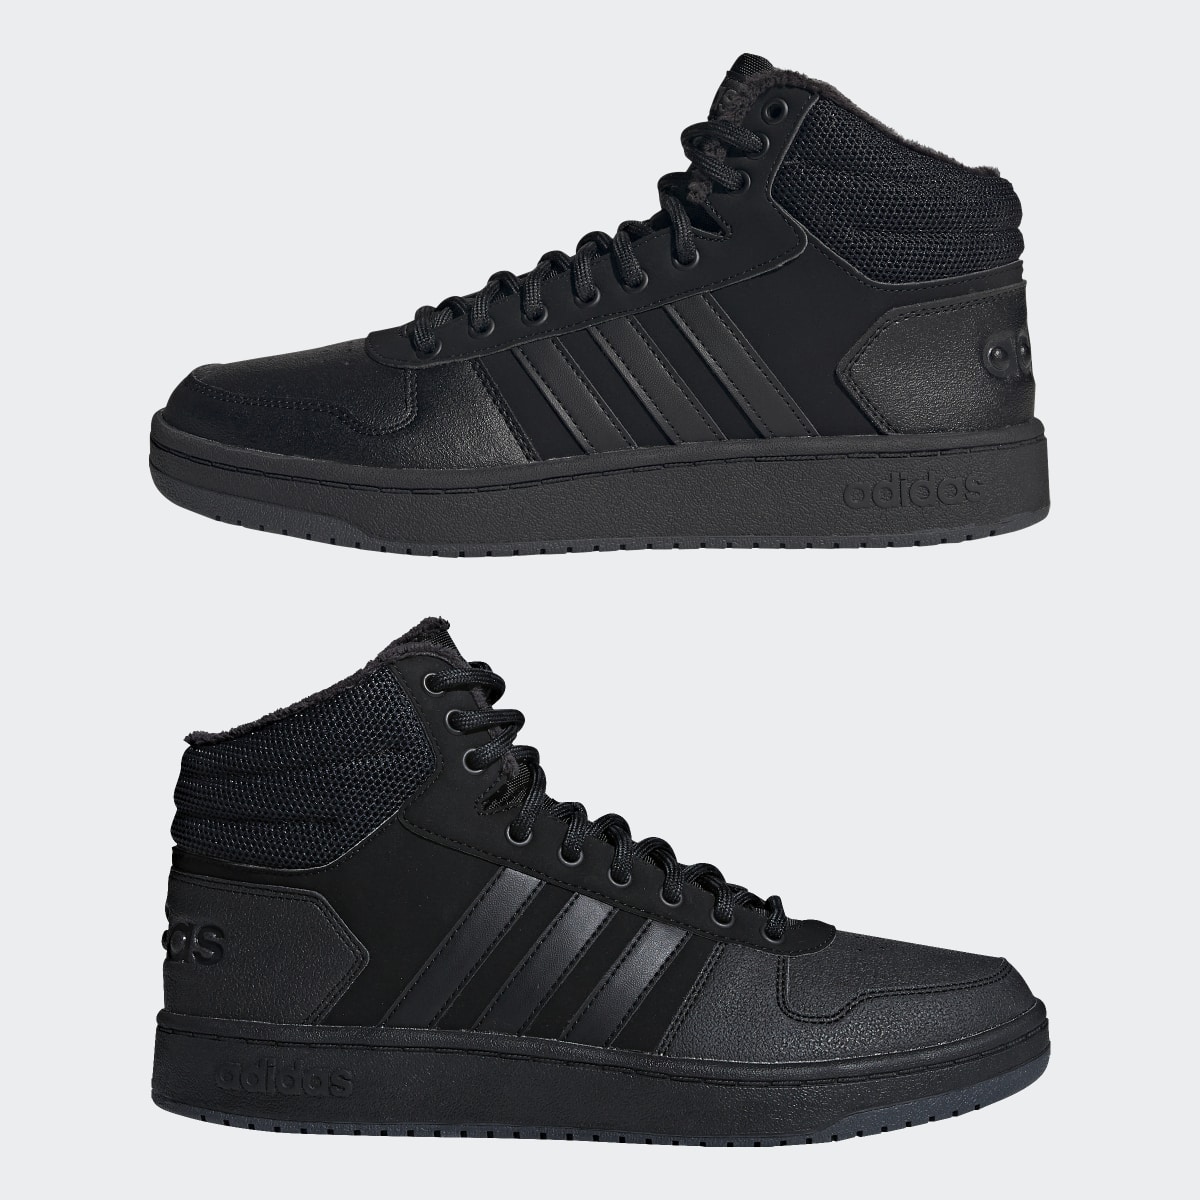 Adidas Hoops 2.0 Mid Shoes. 9